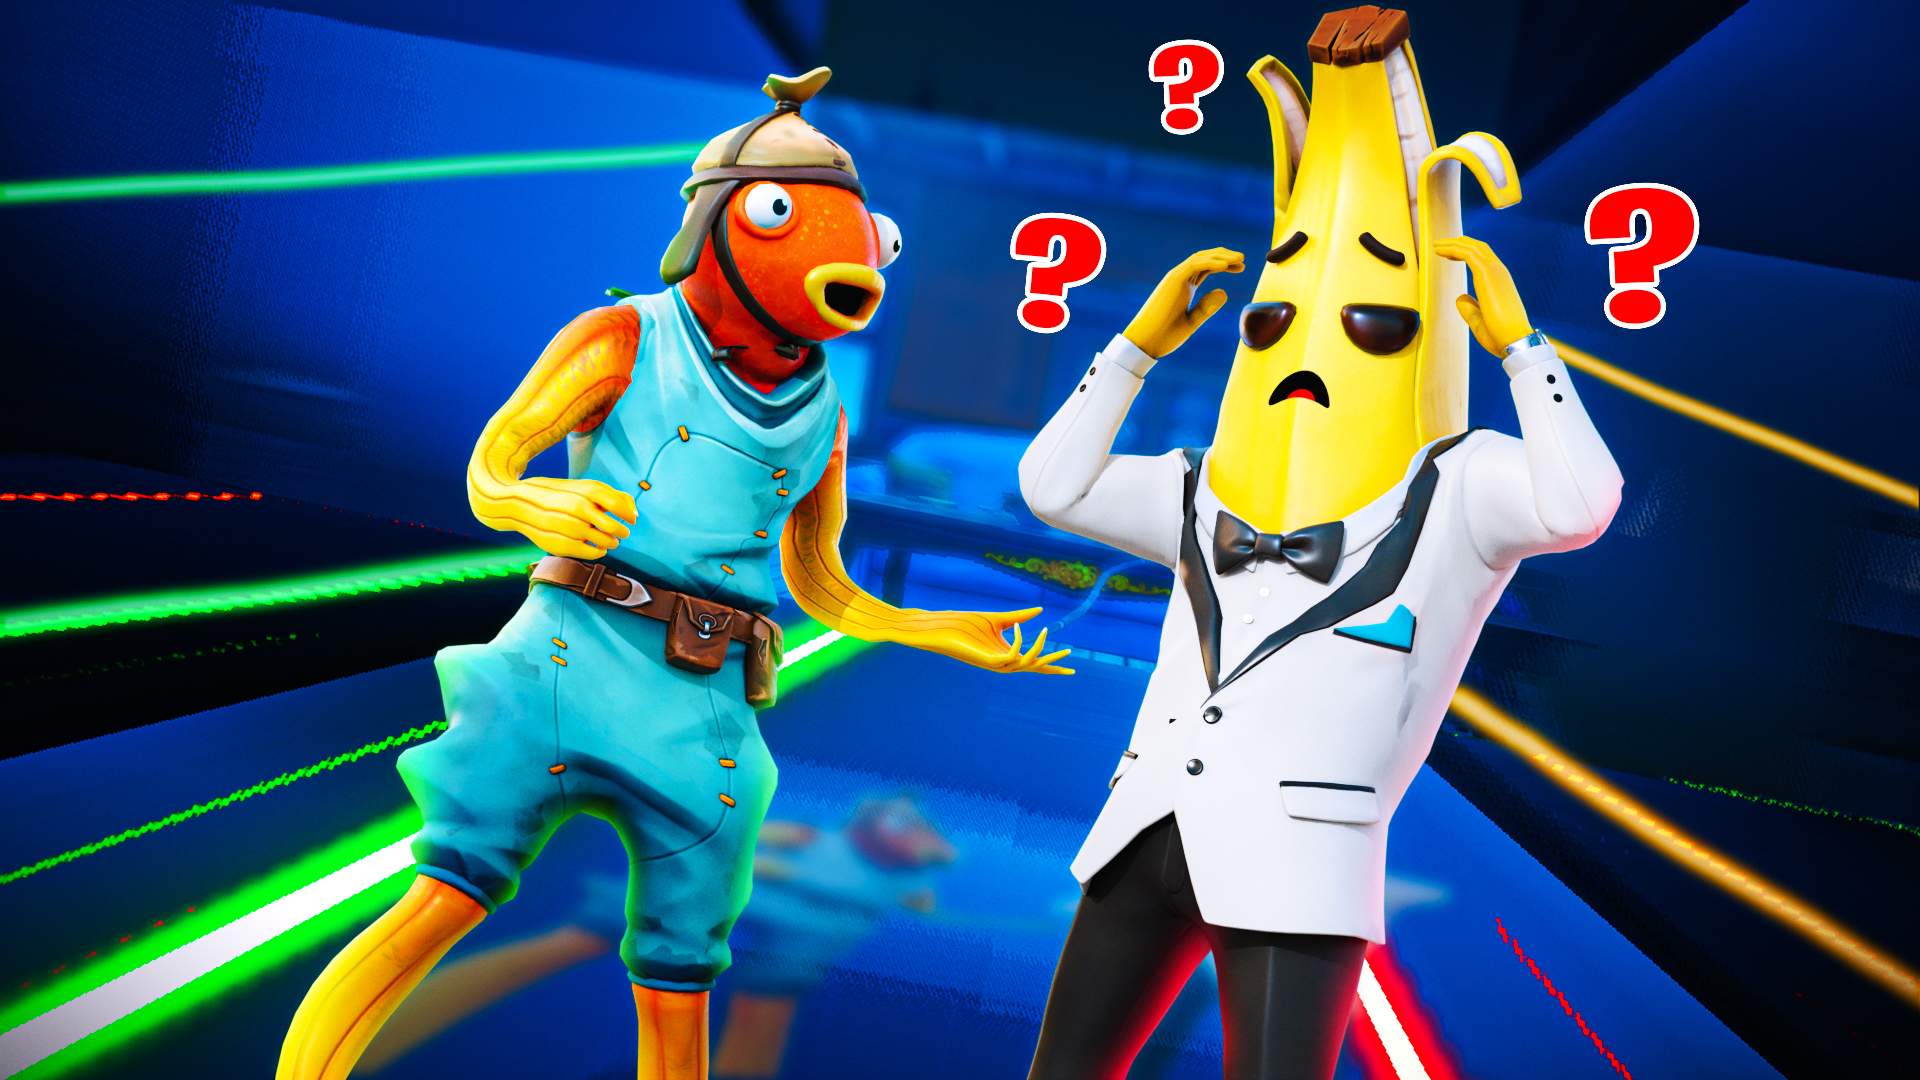 HELP! WE'RE STUCK IN THE TV - DUO PUZZLE - Fortnite Creative Map